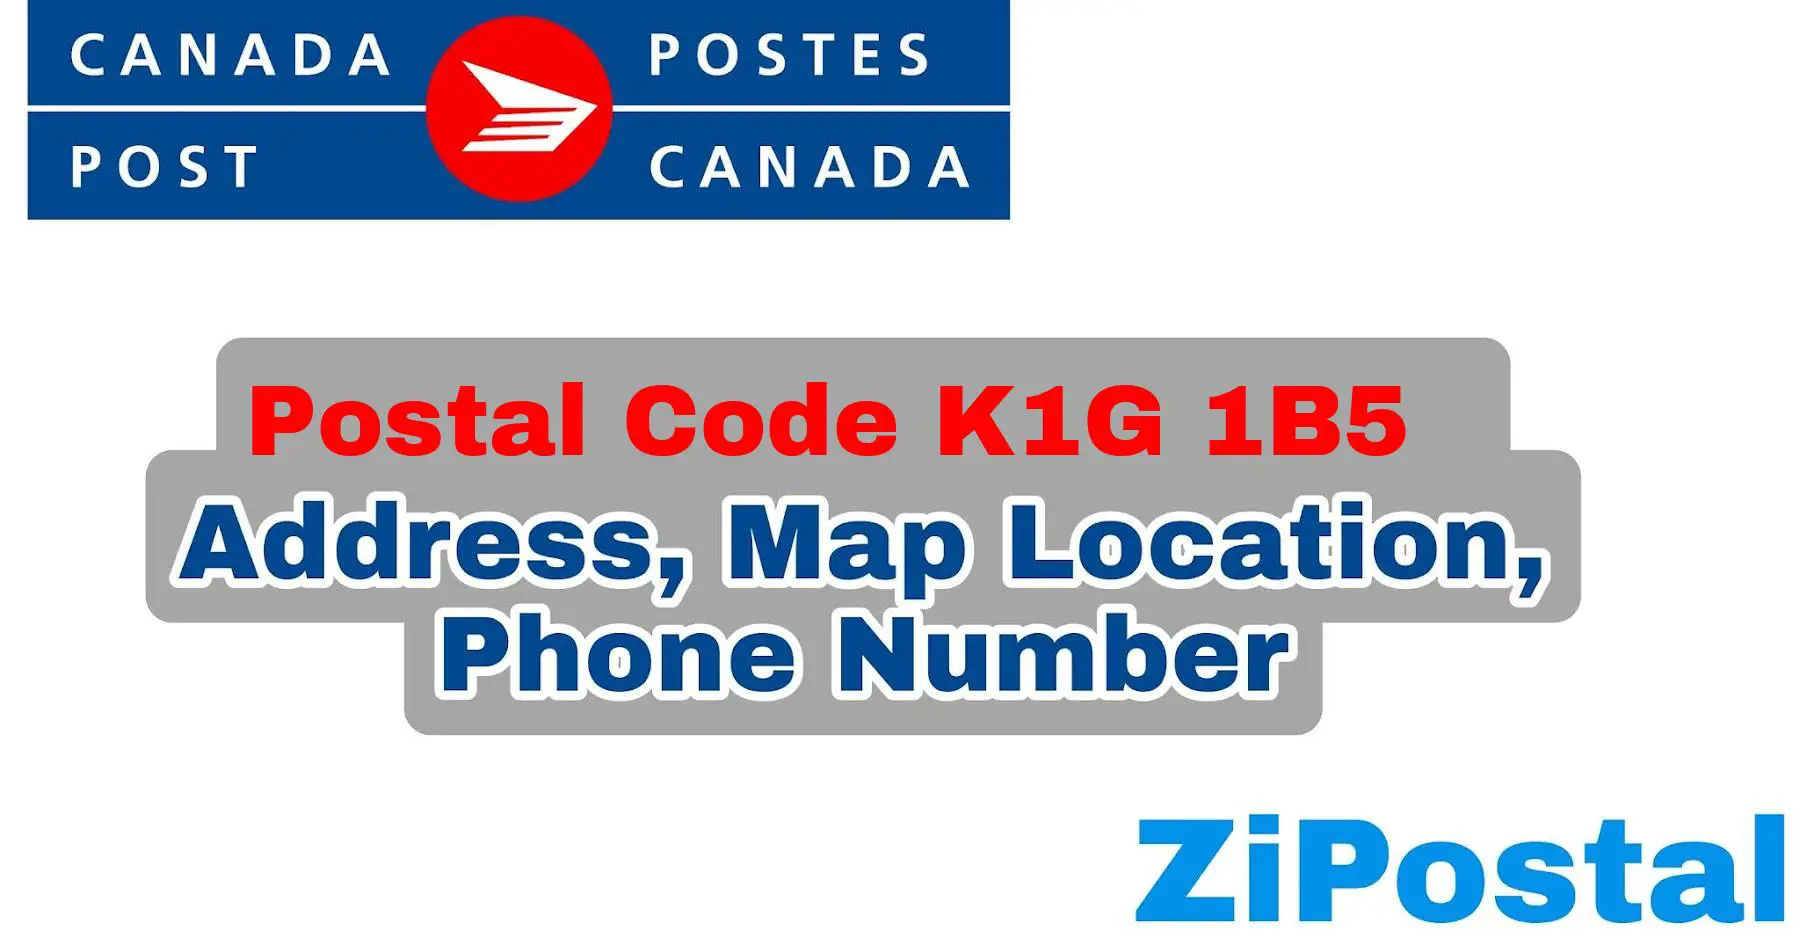 Postal Code K1G 1B5 Address Map Location and Phone Number